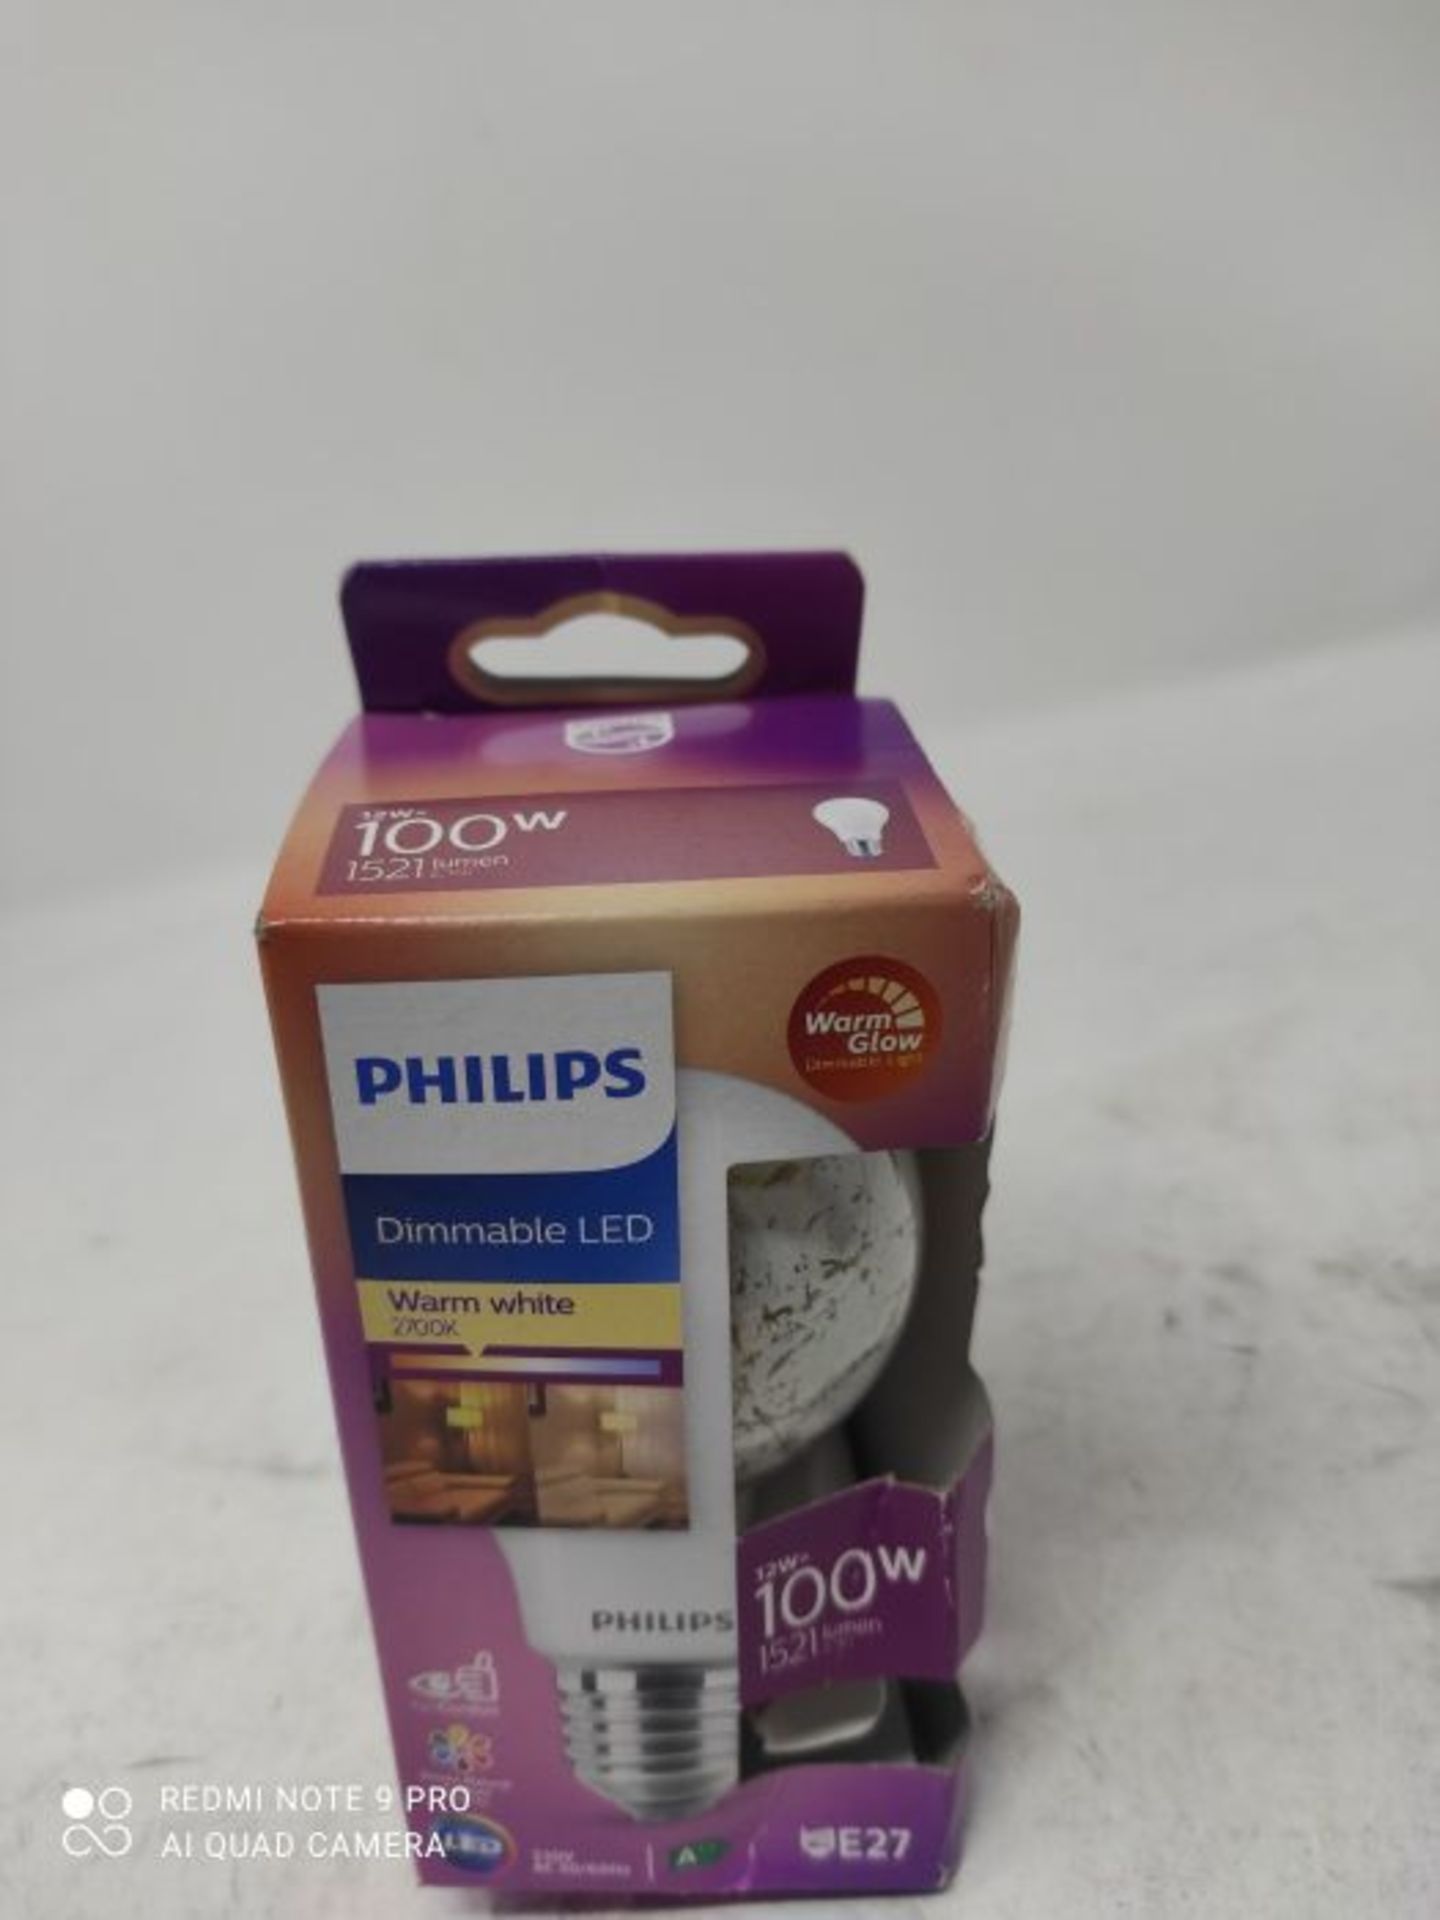 Philips LED Classic A60 Frosted Light Bulb WarmGlow Dimmable [E27 Edison Screw] 11.5W - Image 2 of 2